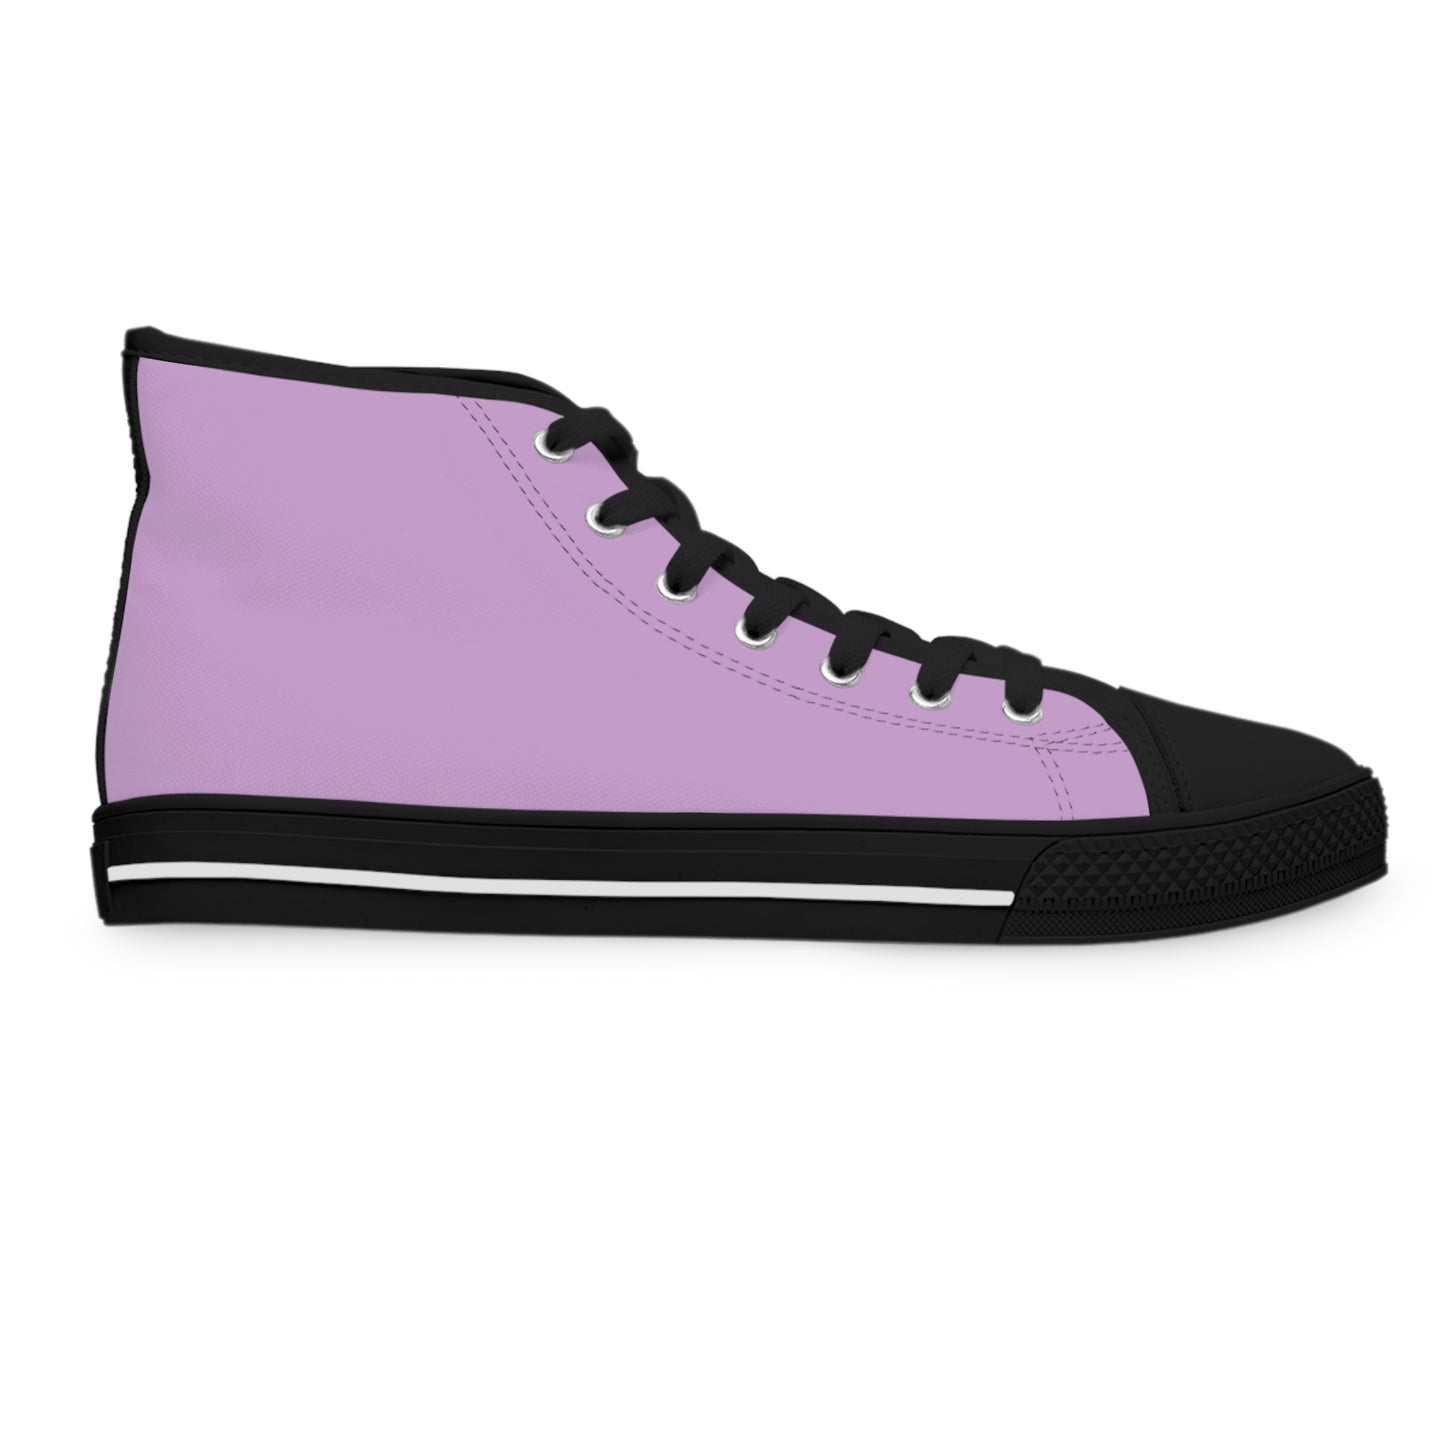 Women's Canvas High Top Solid Color Sneakers - Pinky Purple US 12 White sole